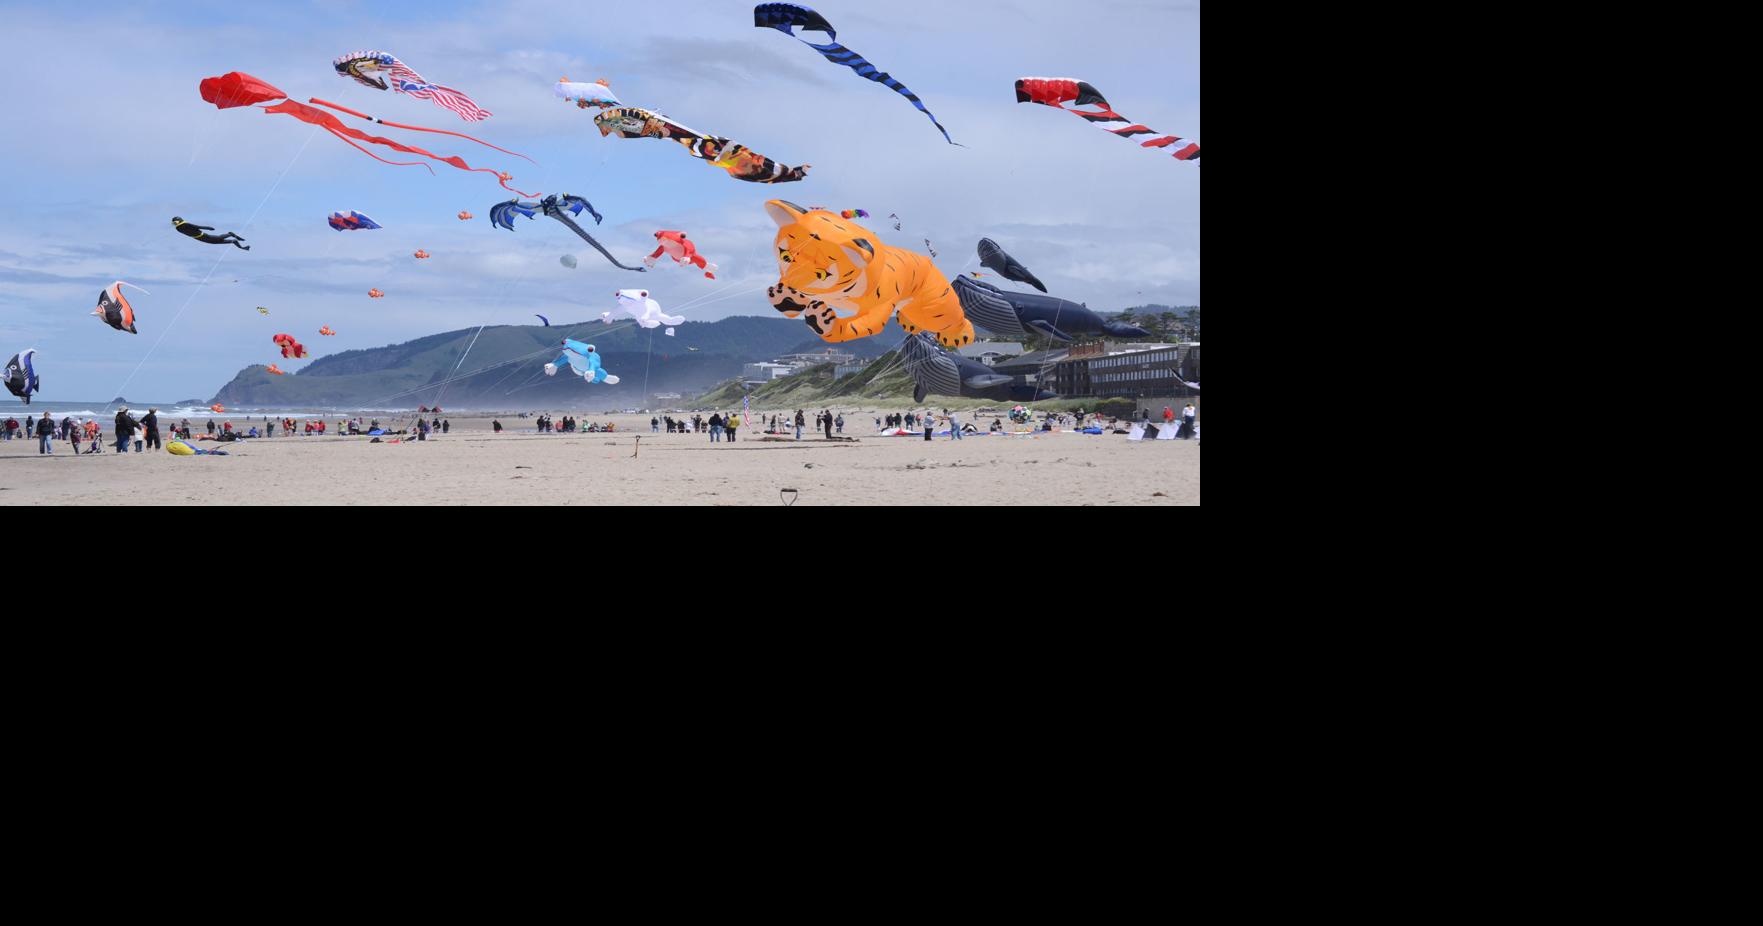 Tradition: Annual Summer Kite Festival returns to Lincoln City | News